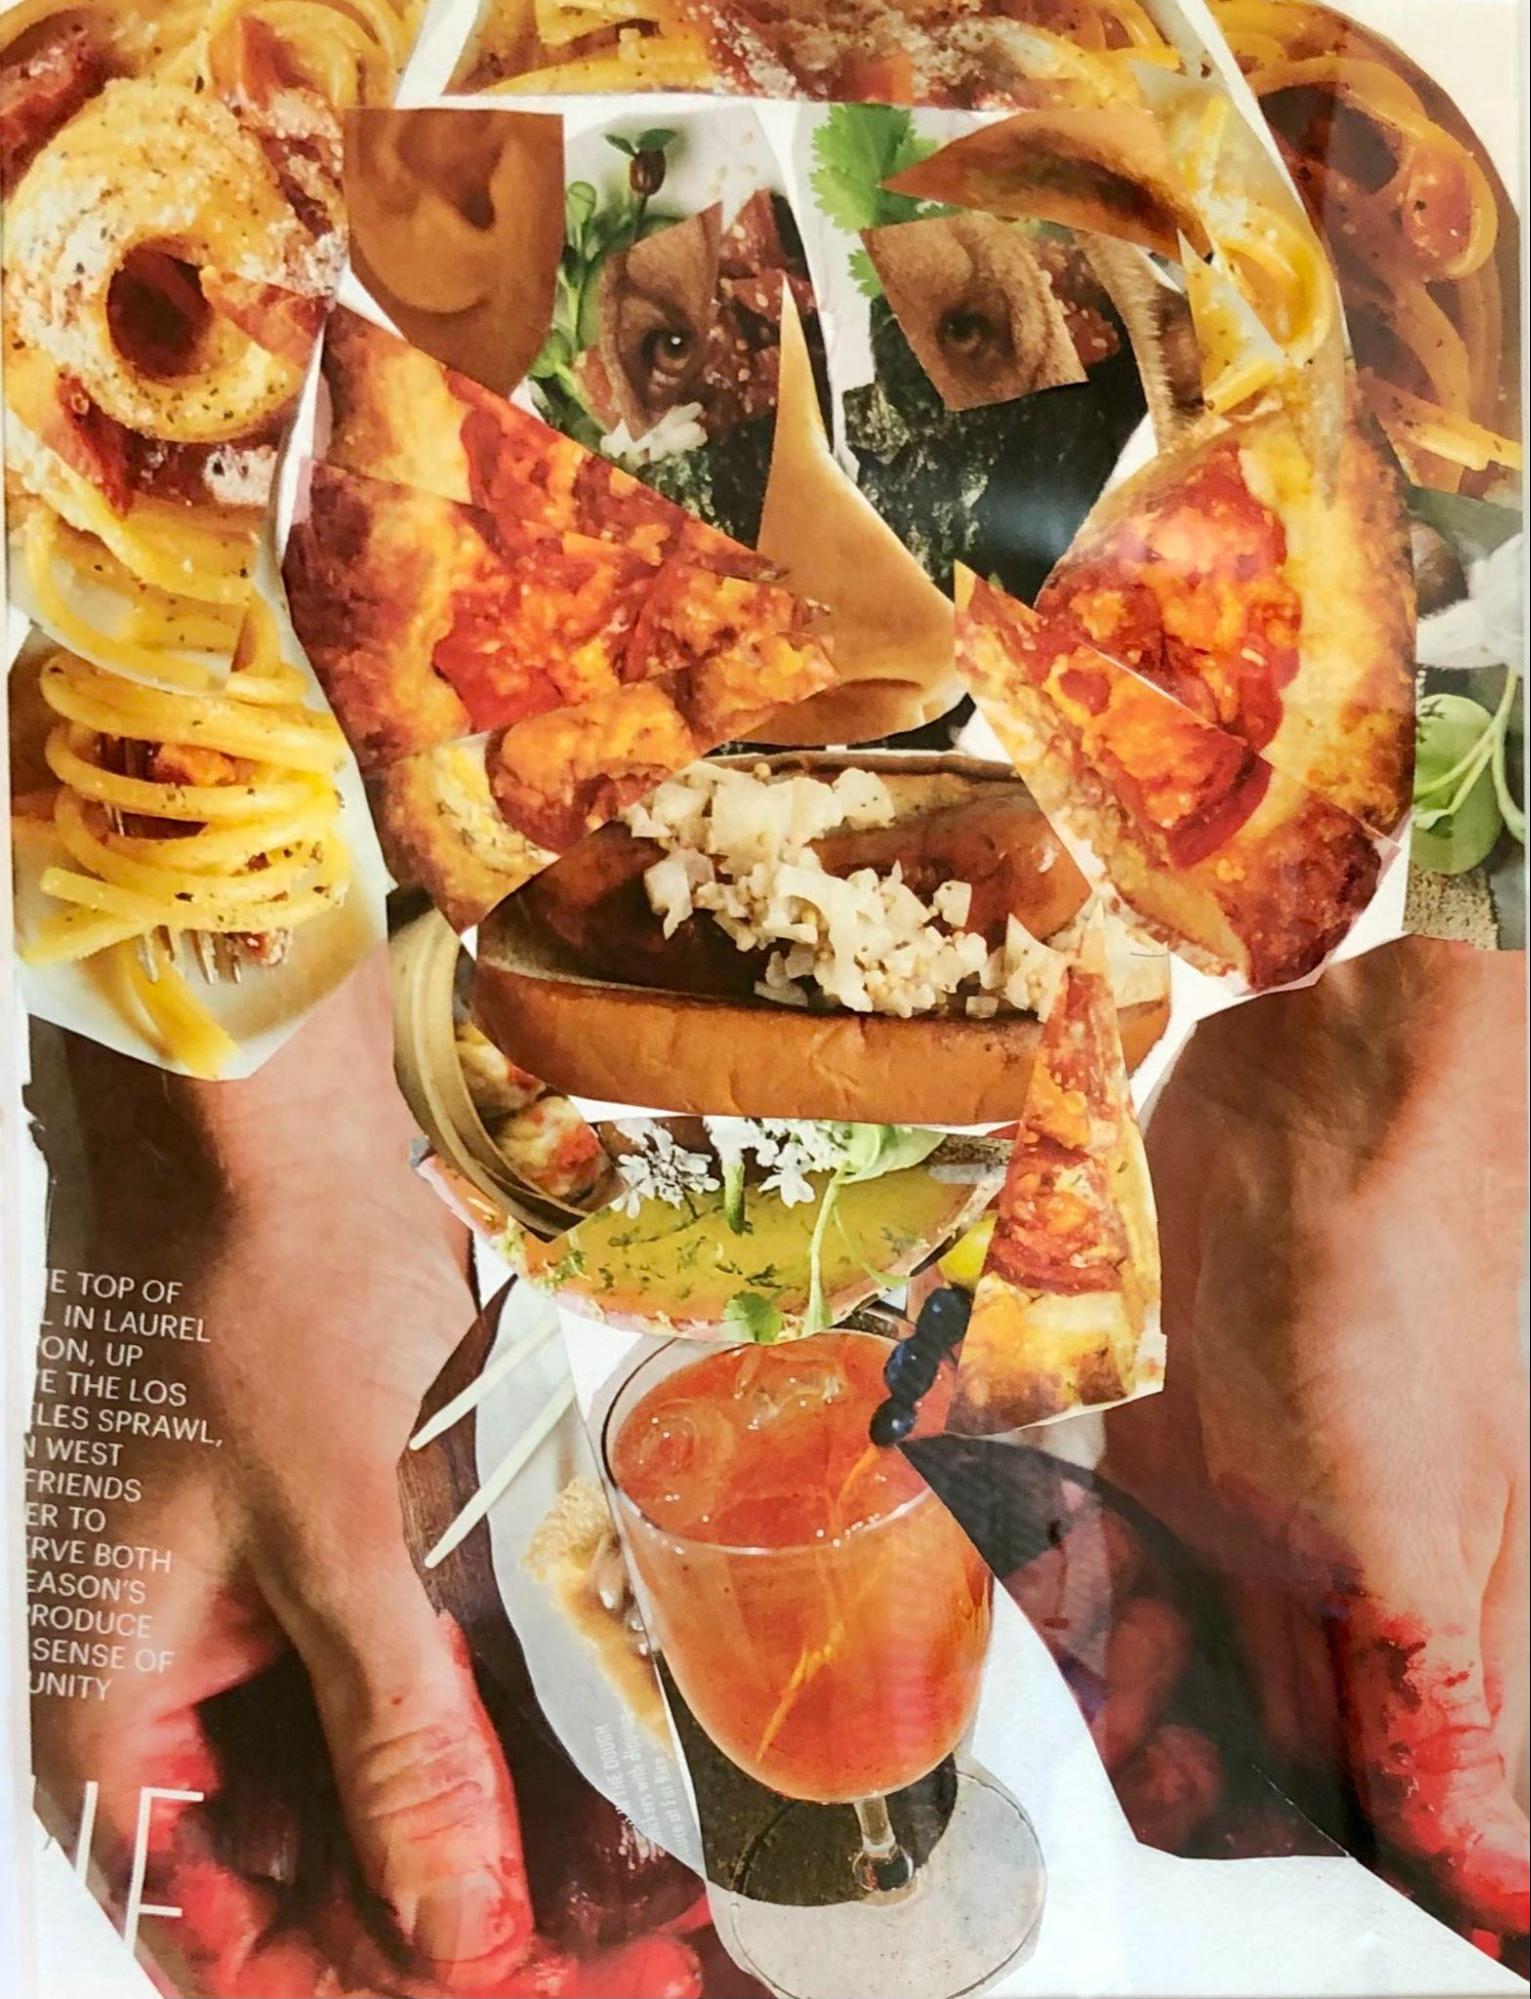 Tom S., Smiling Buffet, 2020-2021, Collage materials, 14” x 11”